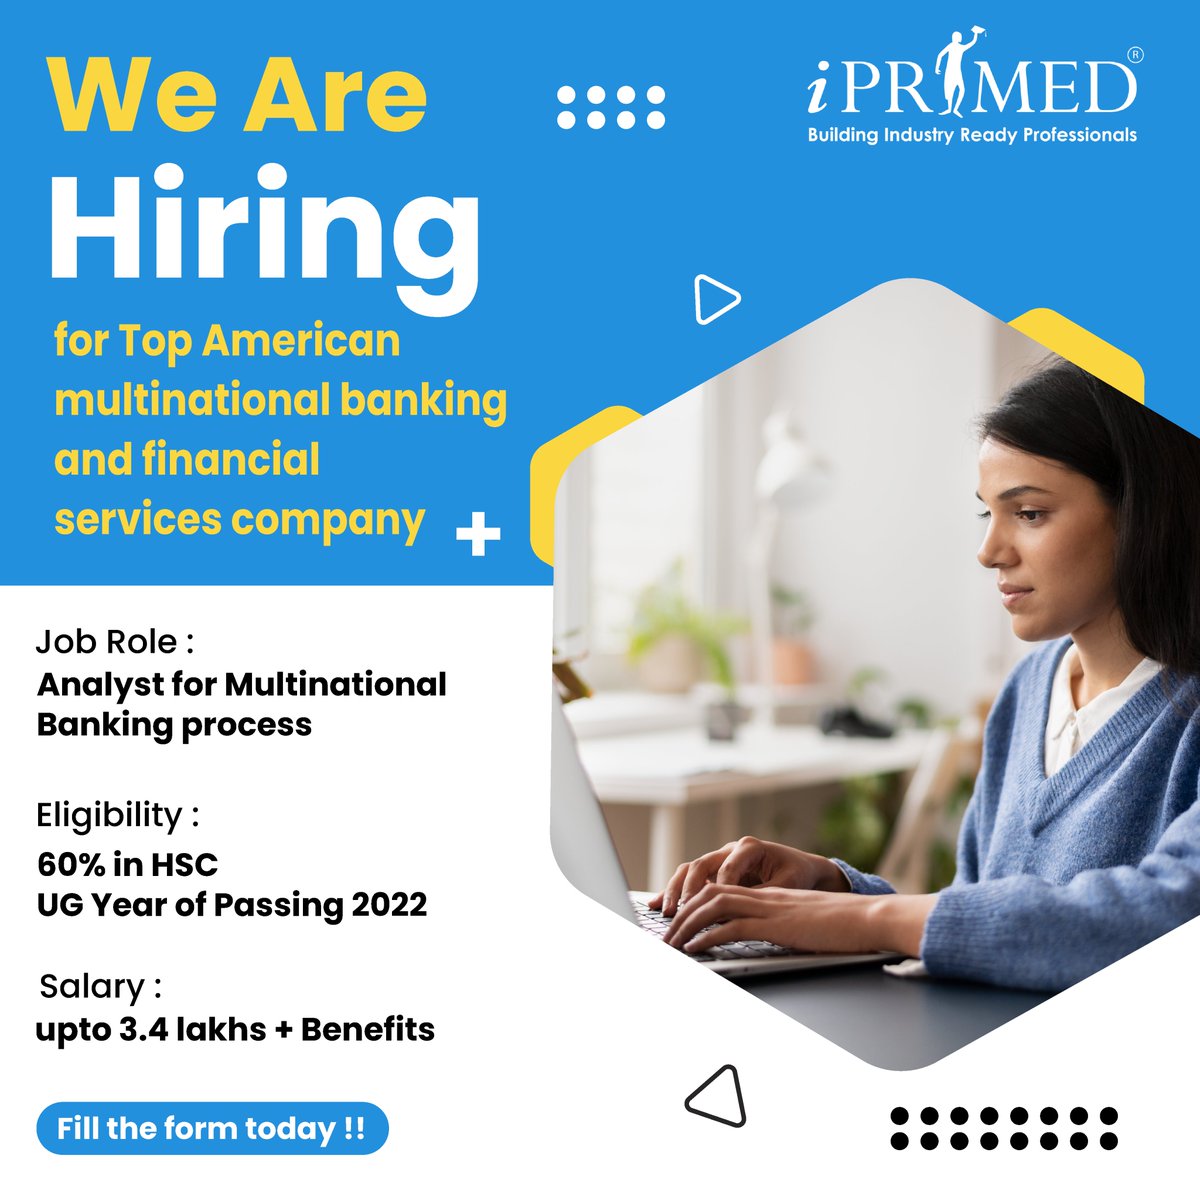 Are you ready to embark on a dynamic career journey? We're thrilled to announce that we're hiring Analysts for the Multinational Banking process. Apply Now: forms.gle/vgrHn9DCm5qZsT…

#Hiring #AnalystJobs #BankingCareers #CareerOpportunity #FinancialServices #OpportunityKnocks